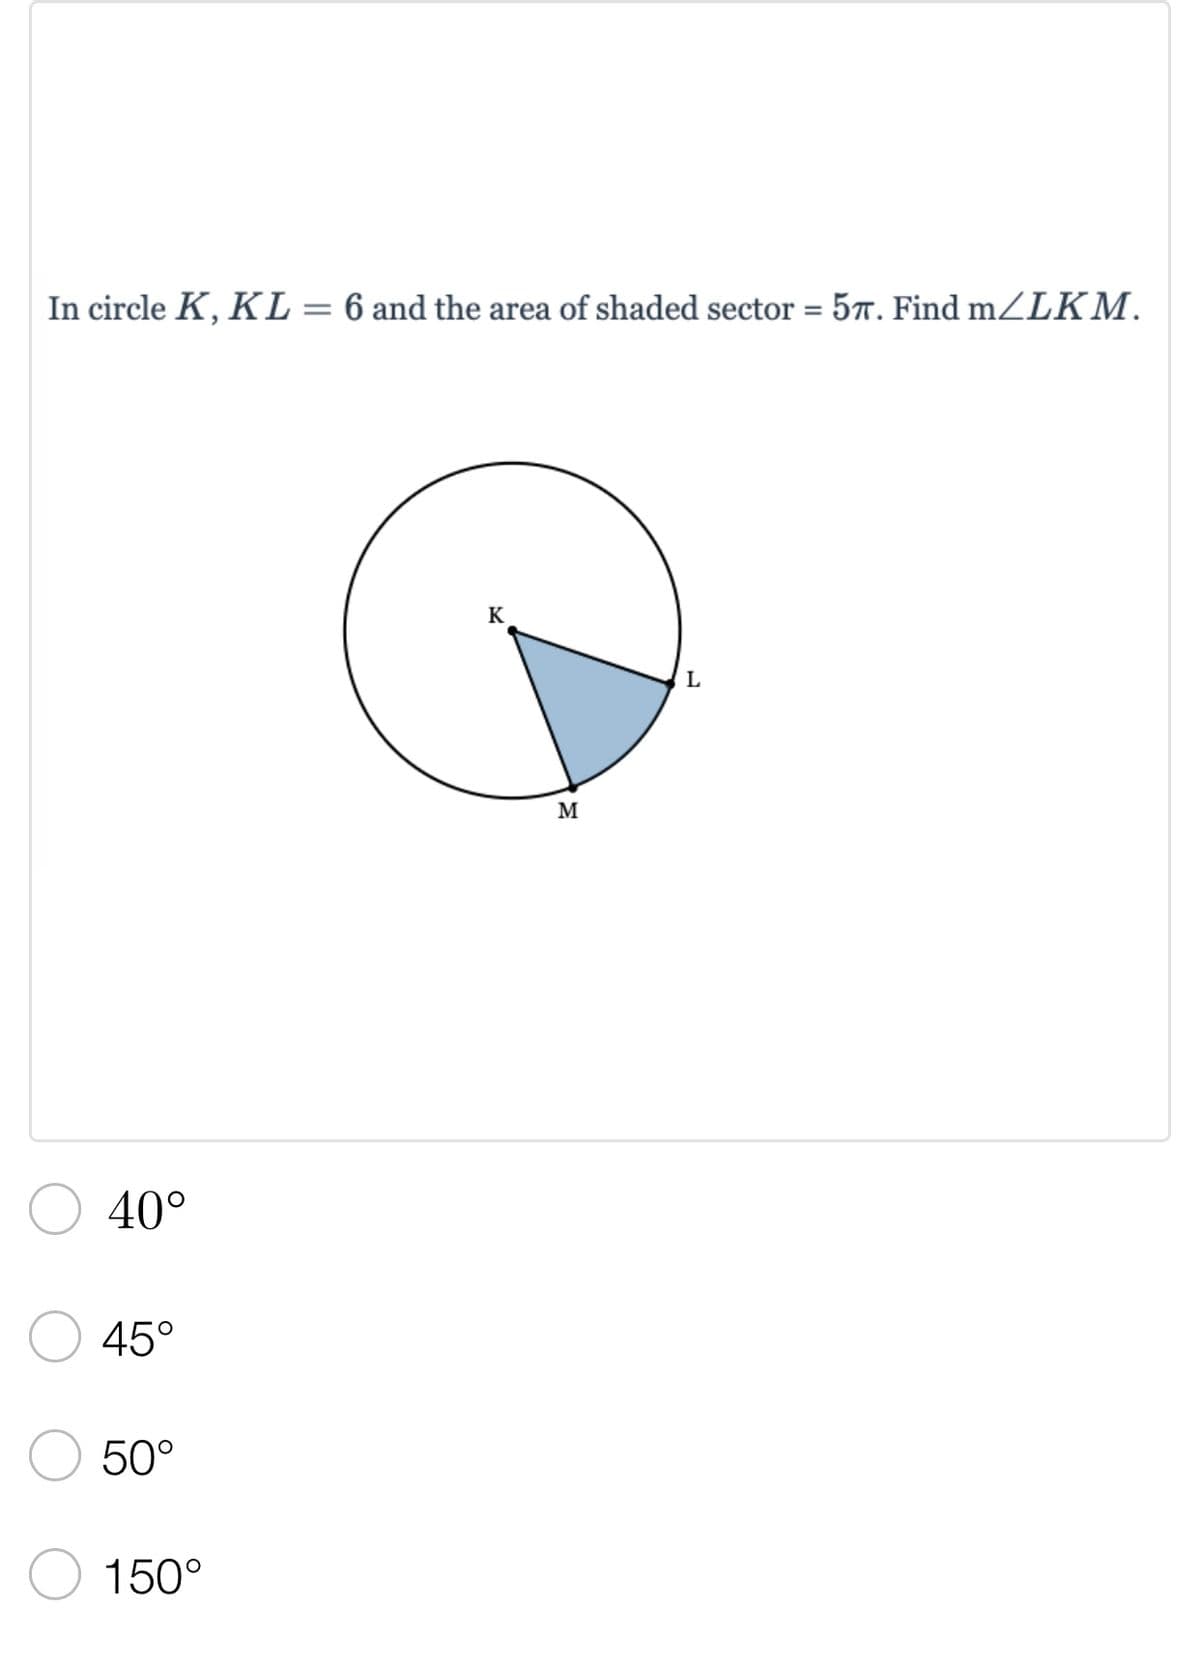 In circle K, KL = 6 and the area of shaded sector = 57. Find m/LKM.
K
L
40°
45°
50°
150°
M